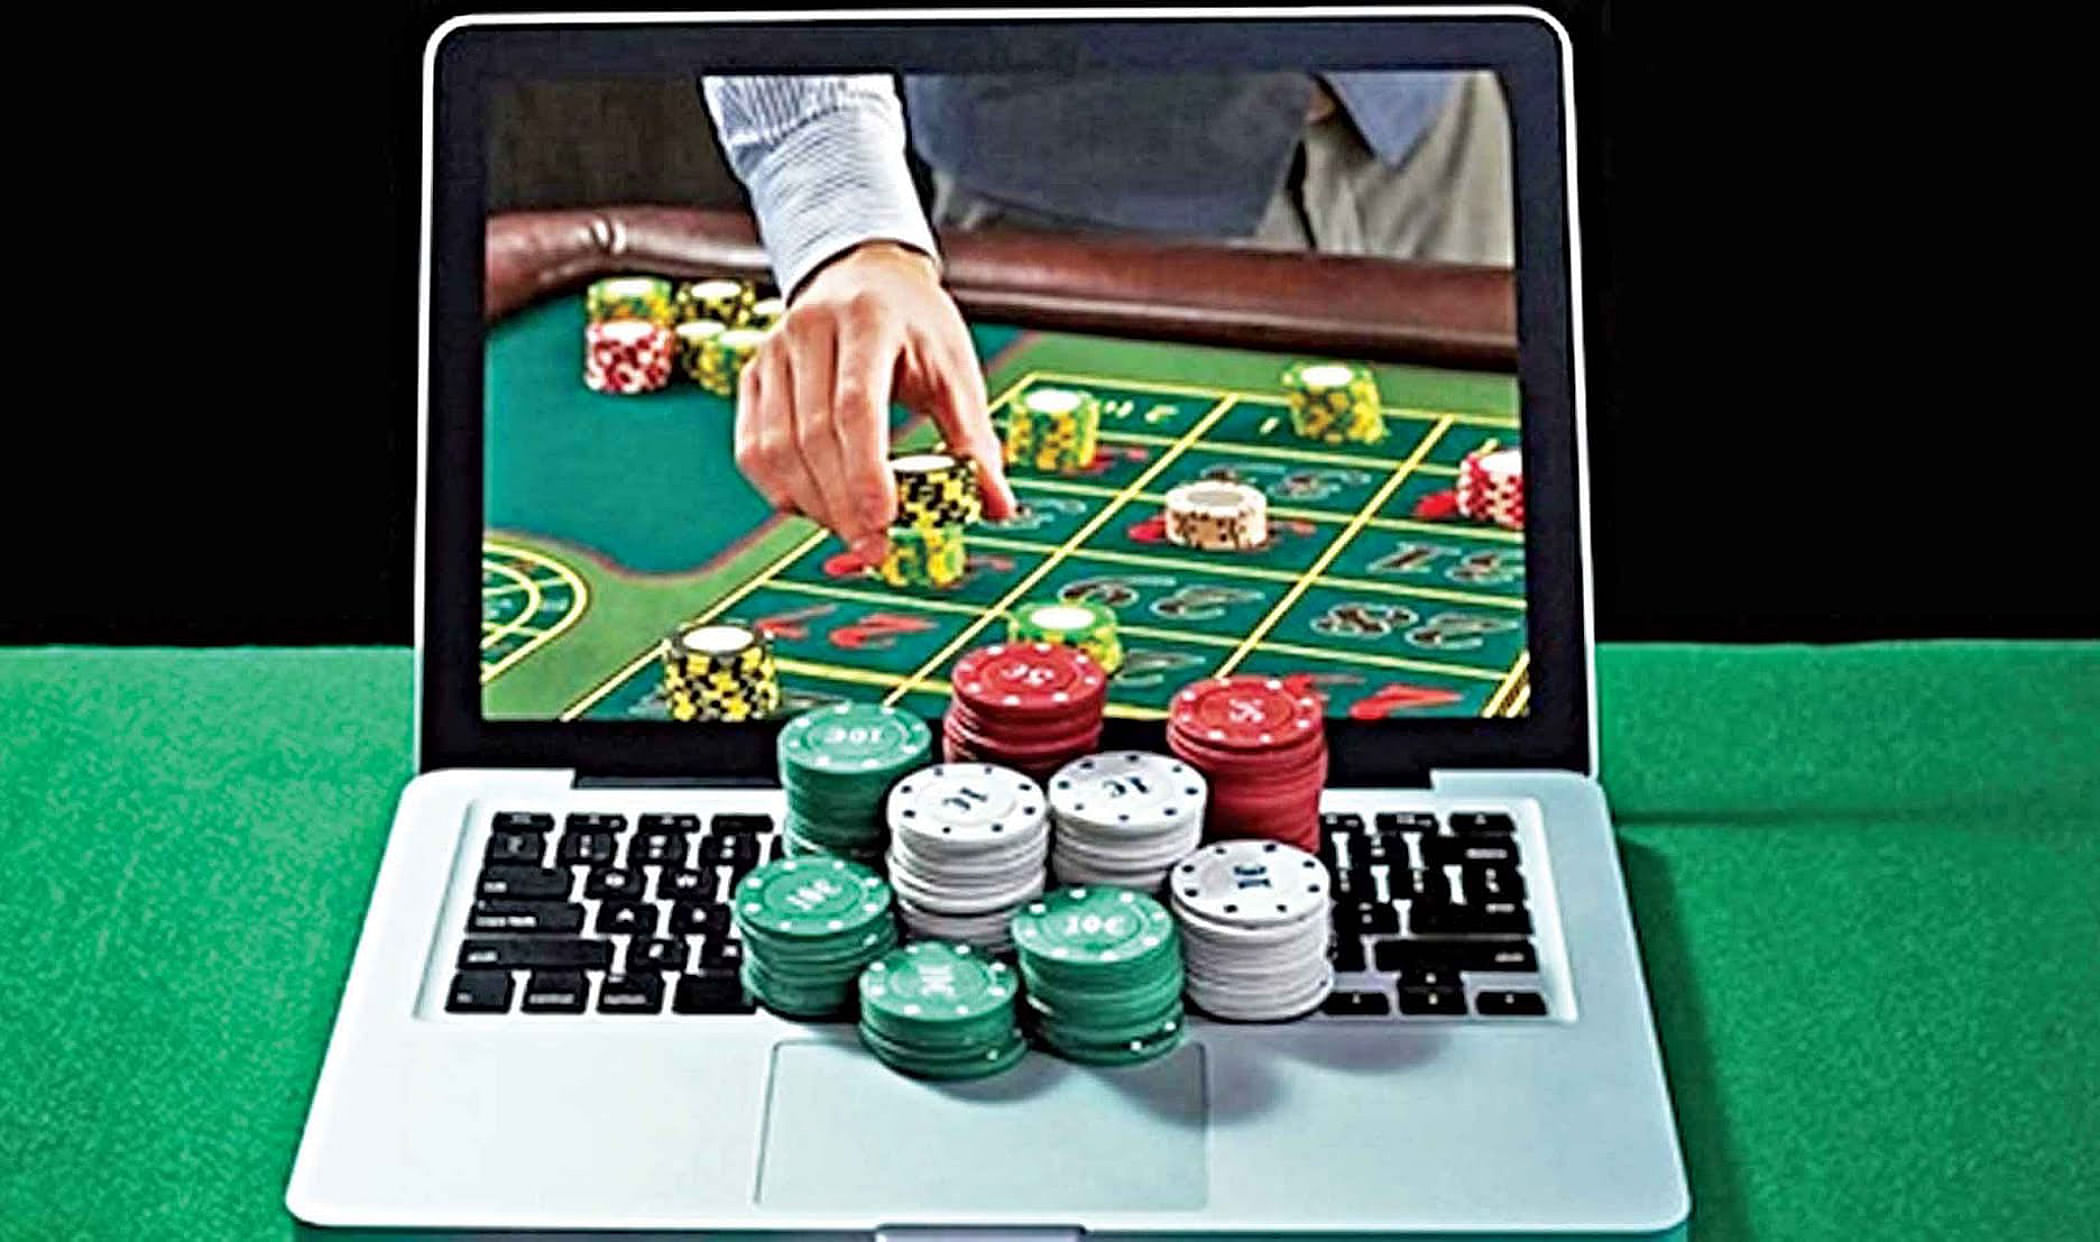 How gambling Made Me A Better Salesperson